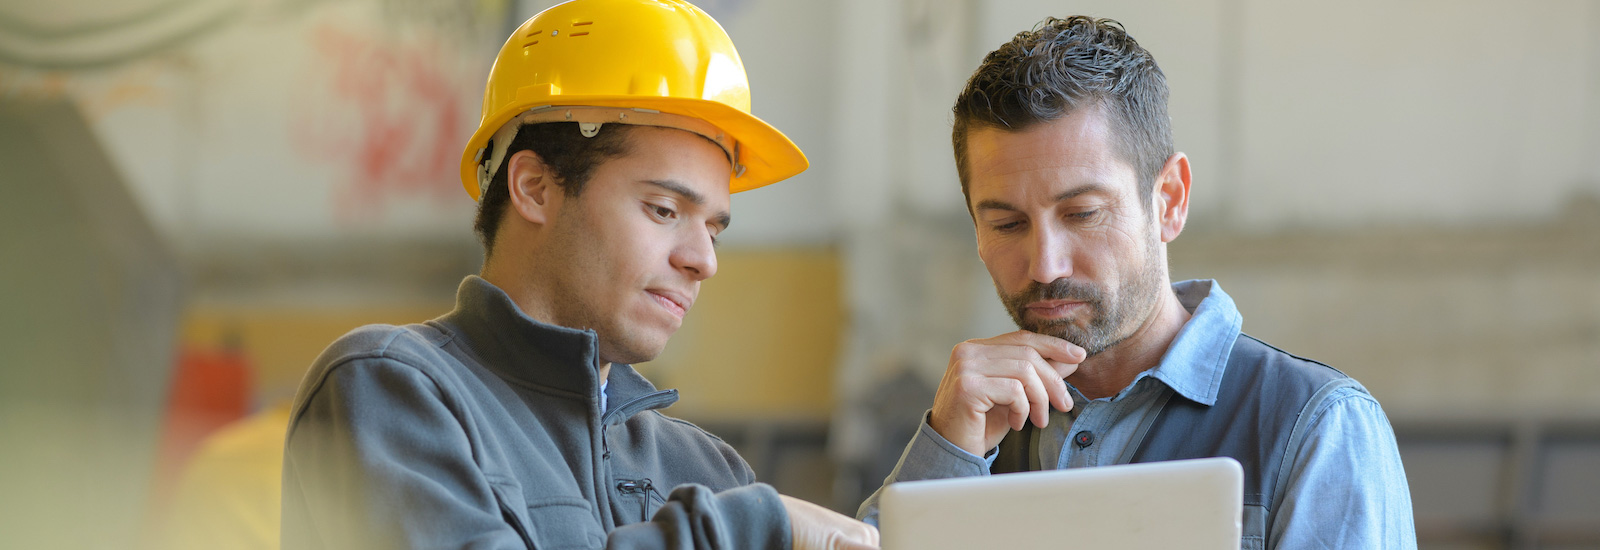 two male electrical power workers looking at computer